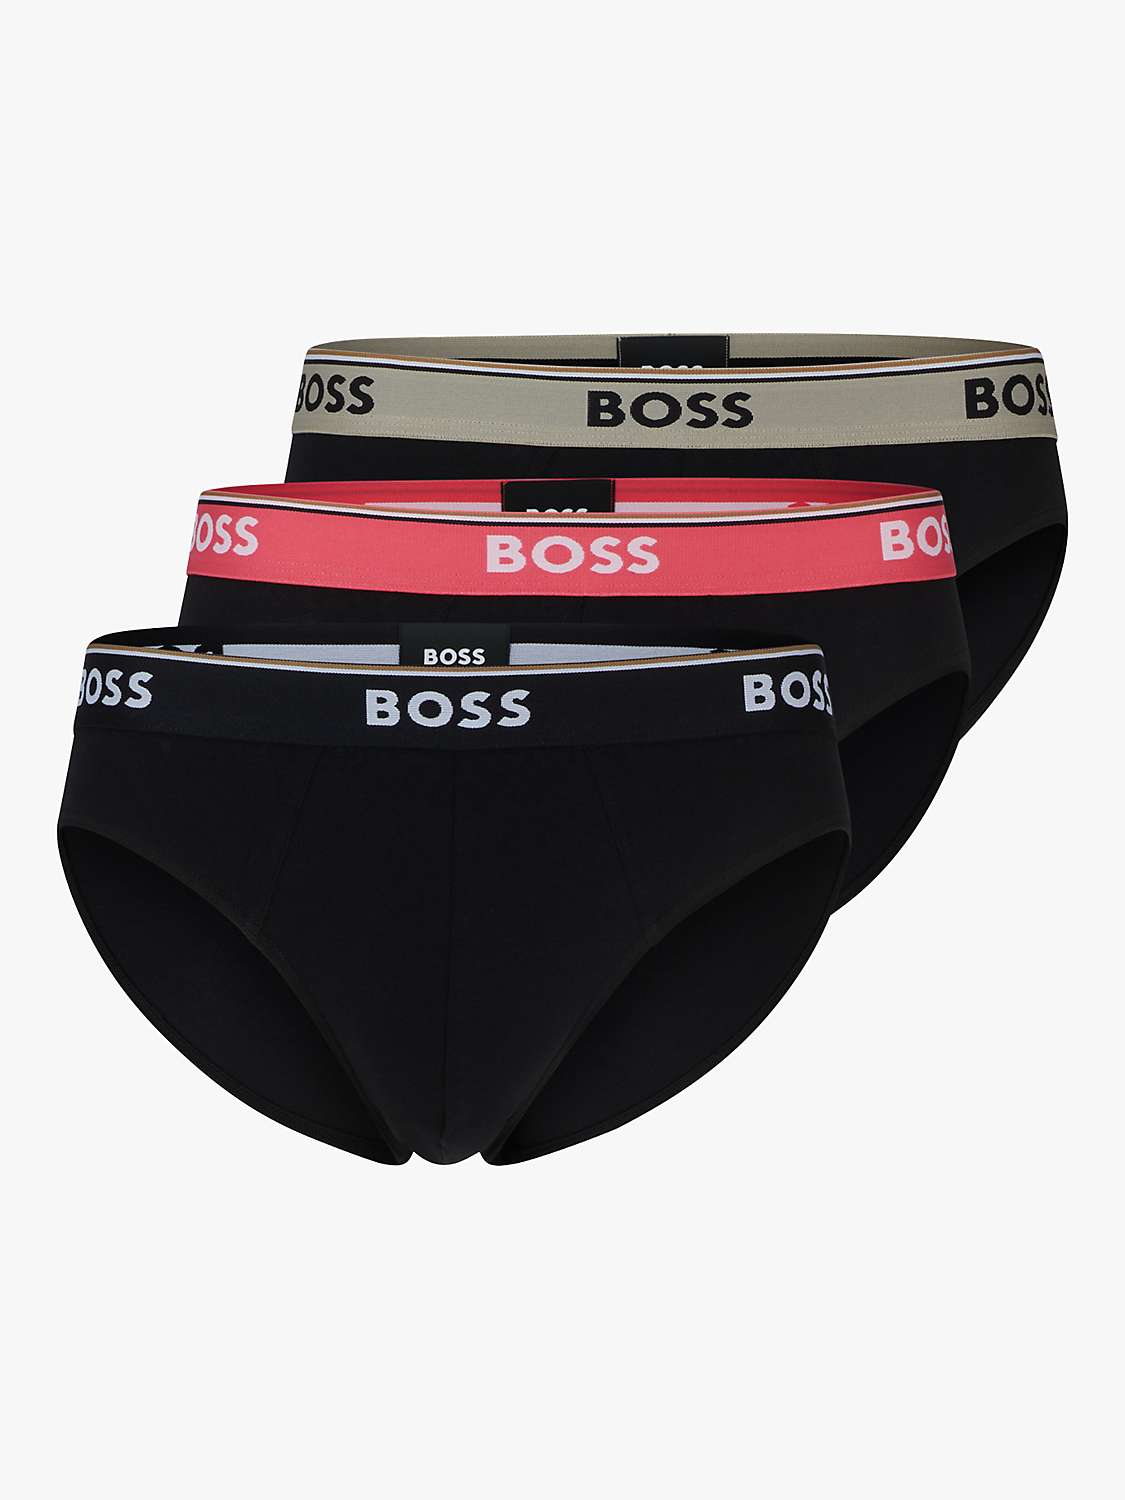 Buy BOSS Stretch Stretch Power Briefs, Pack of 3 Online at johnlewis.com